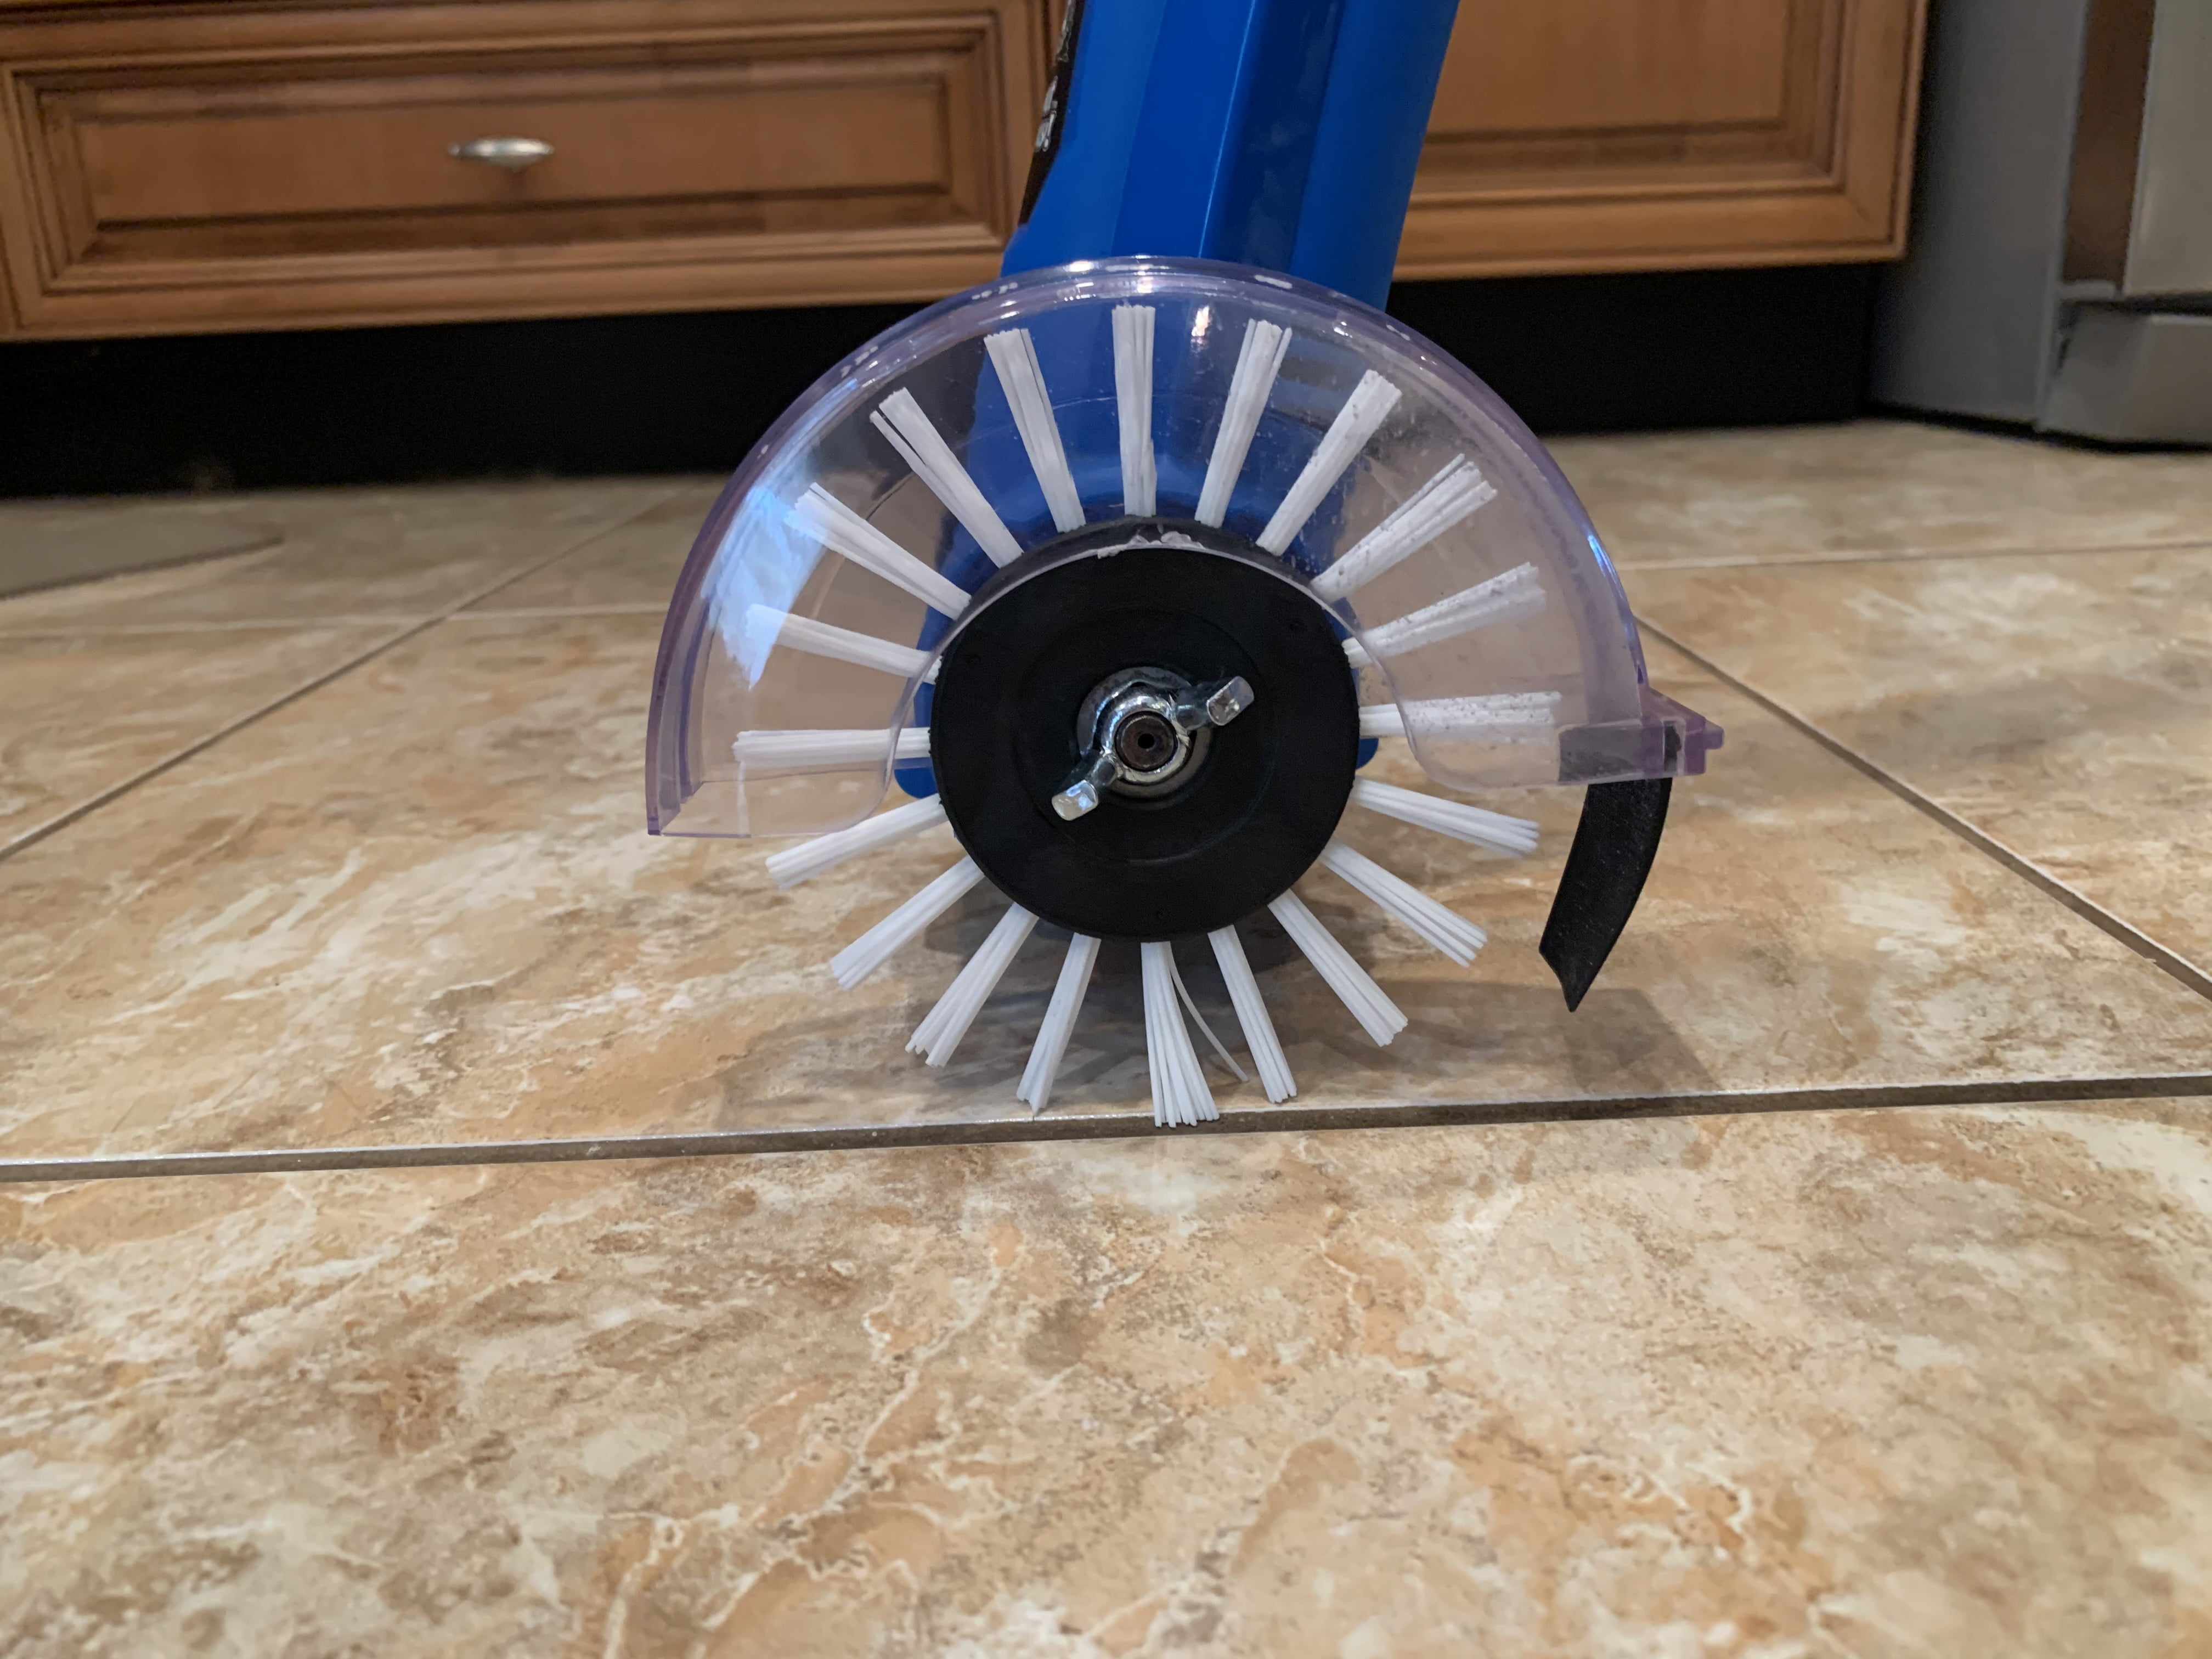 Grout Groovy! Premium Model Electric Stand Up Tile Grout Cleaner | Removes Dirt from Grout | Adjustable Telescopic Handle | 1 Heavy Duty Brush | 20